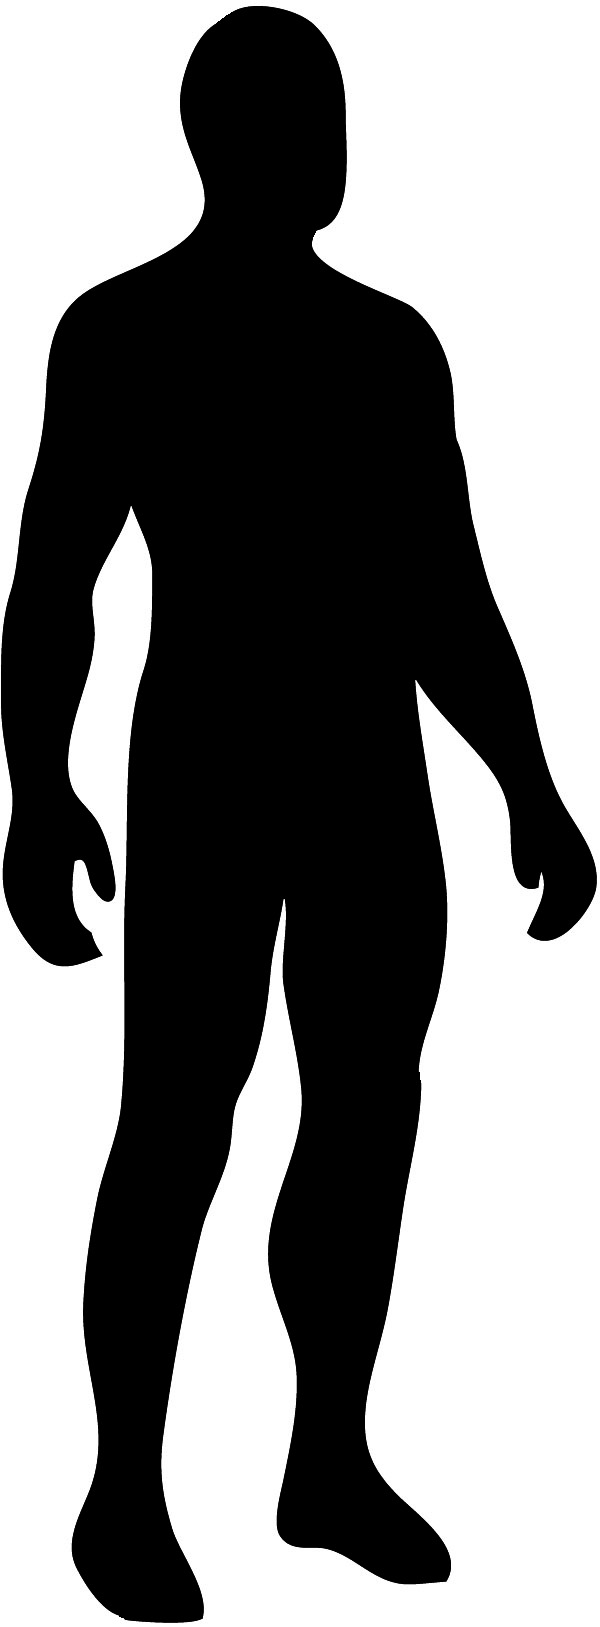 Body Silhouette Outline - Clipart library